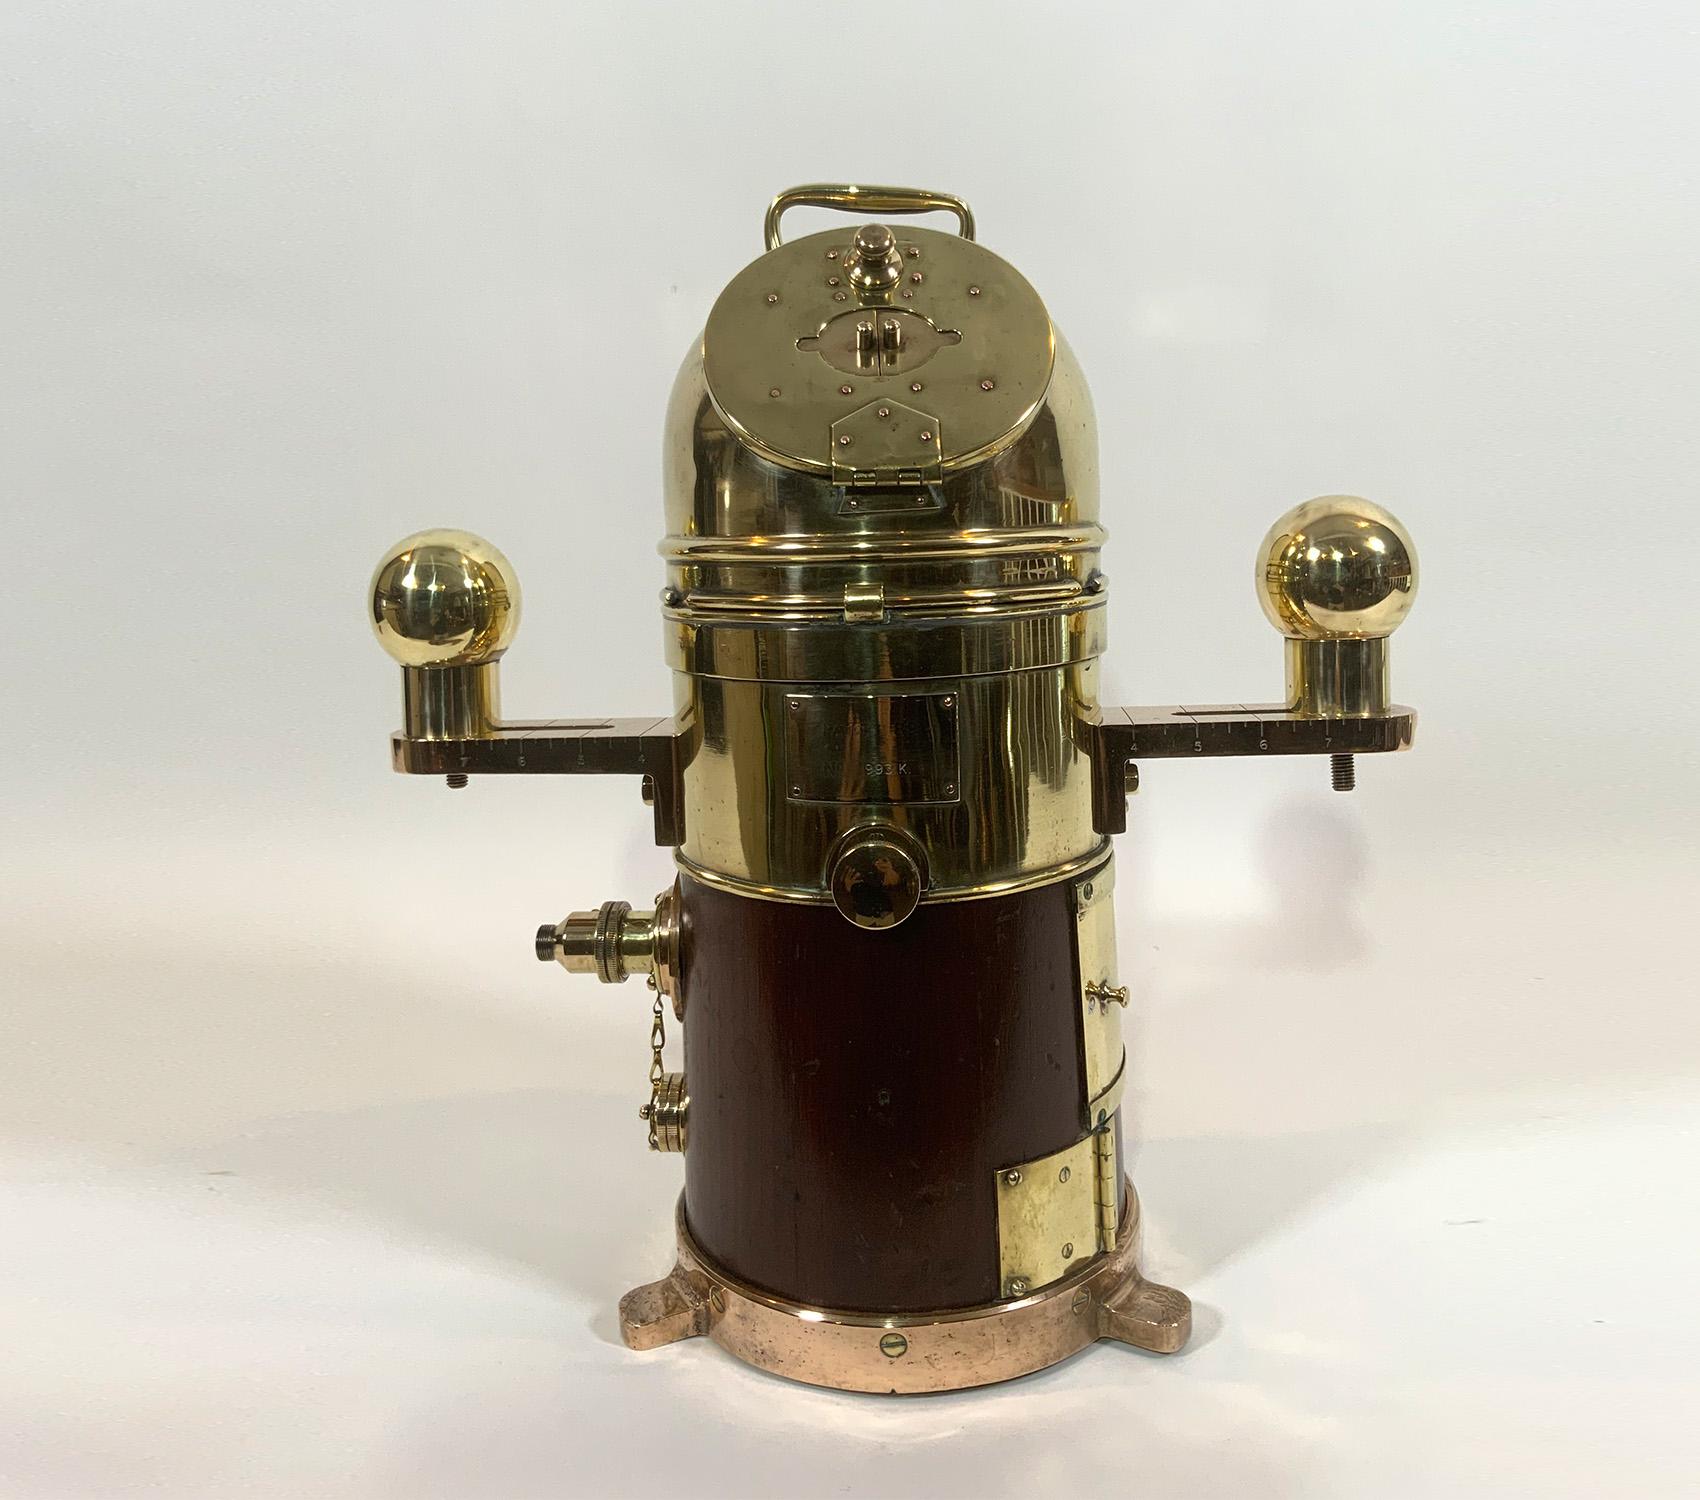 Extremely rare “Faithfull Freddie” ships binnacle in fabulous condition. Meticulously polished and with gimballed compass, countless brass fittings. Rarely found brass compensating ball covers, heavy brass base with mounting flanges. As good as they